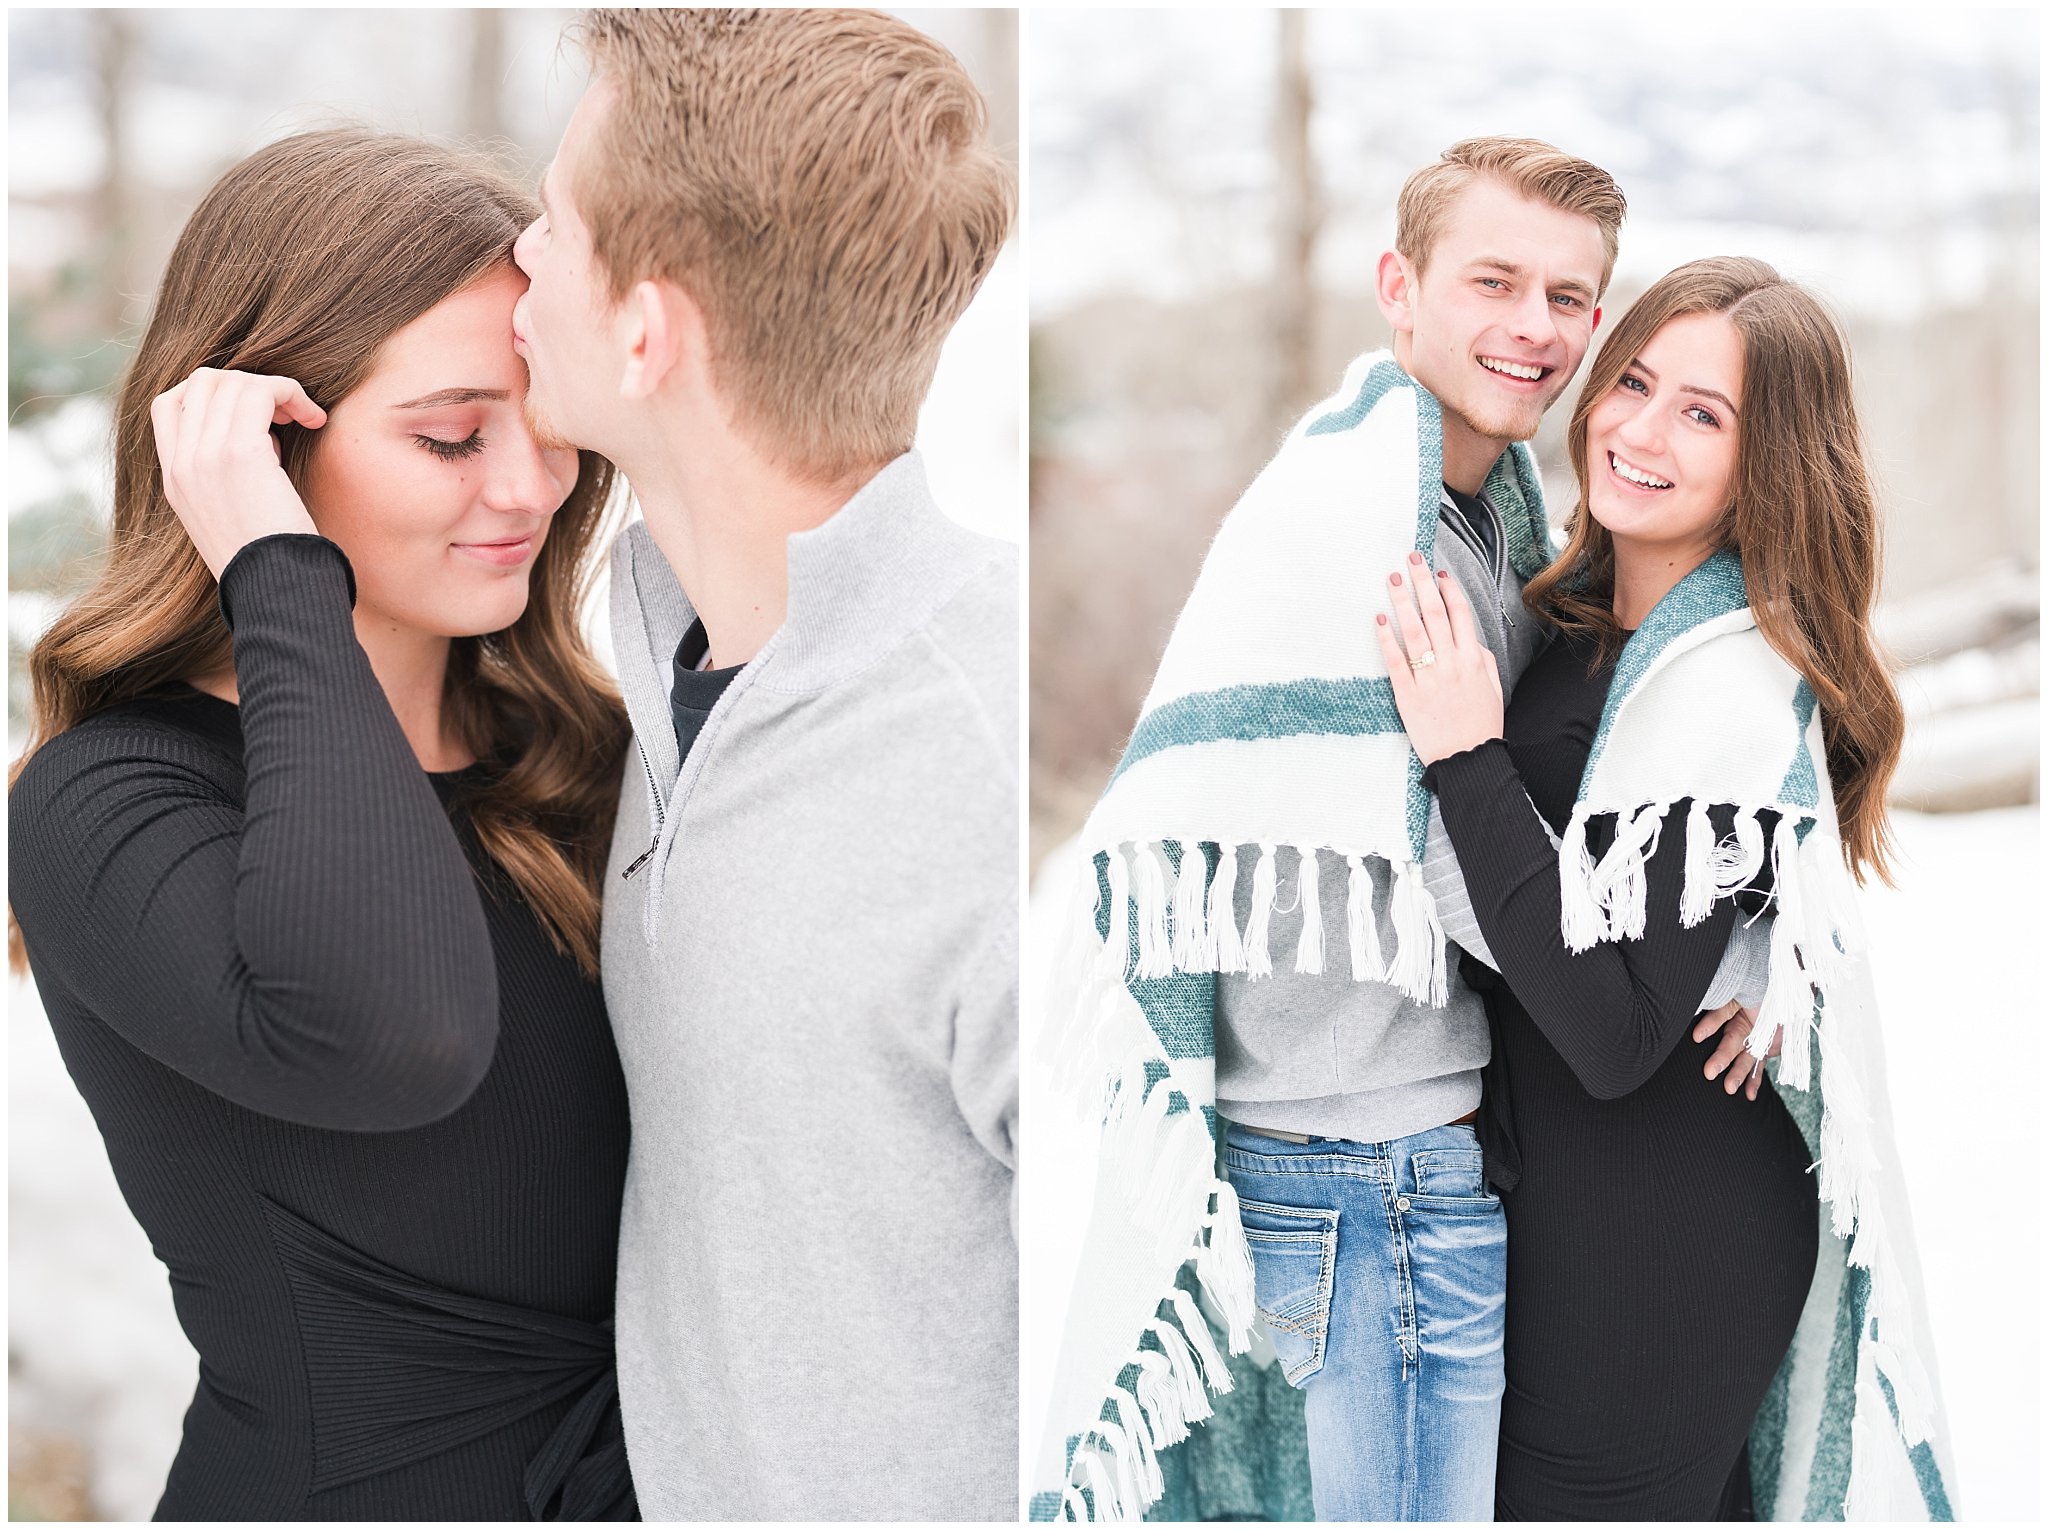 Couple dressed in black dress, grey sweater, and blanket in the snowy Utah mountains | Mountain Green Winter Engagement | Jessie and Dallin Photography